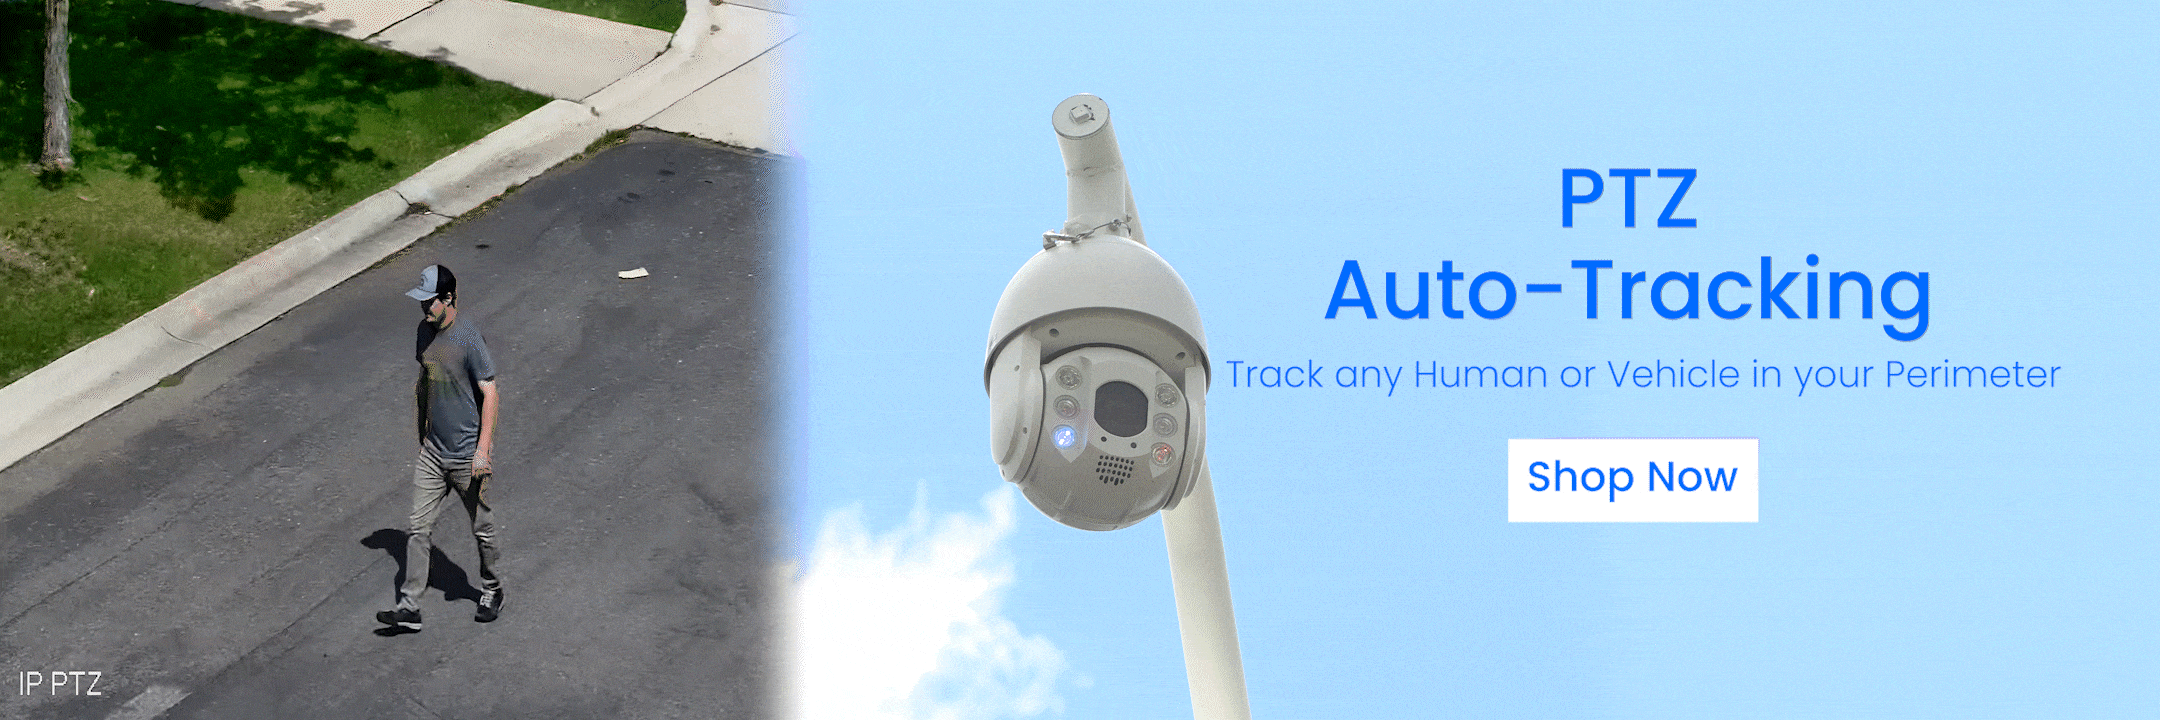 auto-tracking, ptz security camera, pan, tilt, zoom, human and vehicle detection